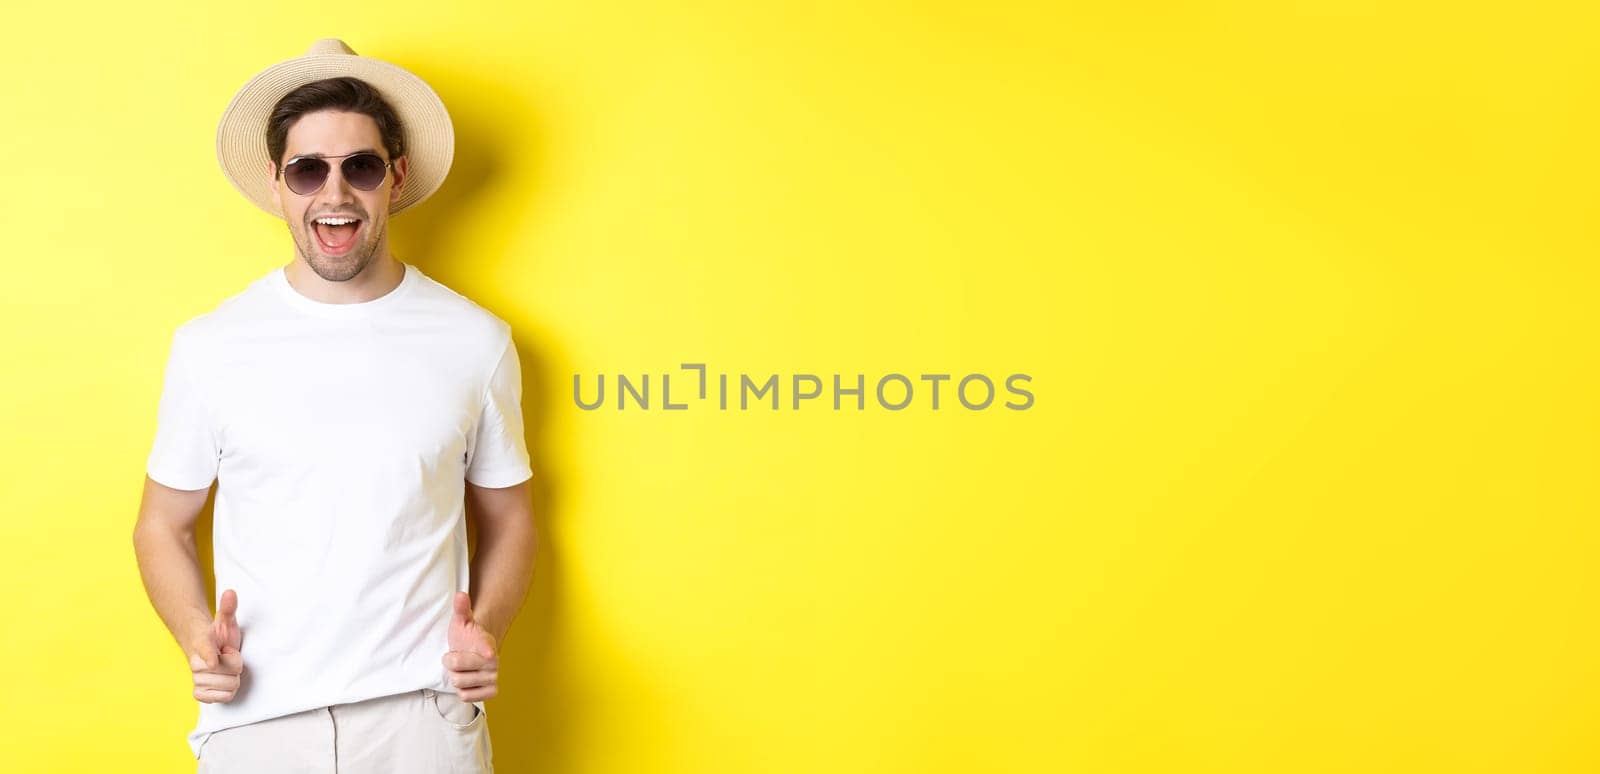 Confident and cheeky guy on vacation flirting with you, pointing finger at camera and winking, wearing summer hat with sunglasses, yellow background.